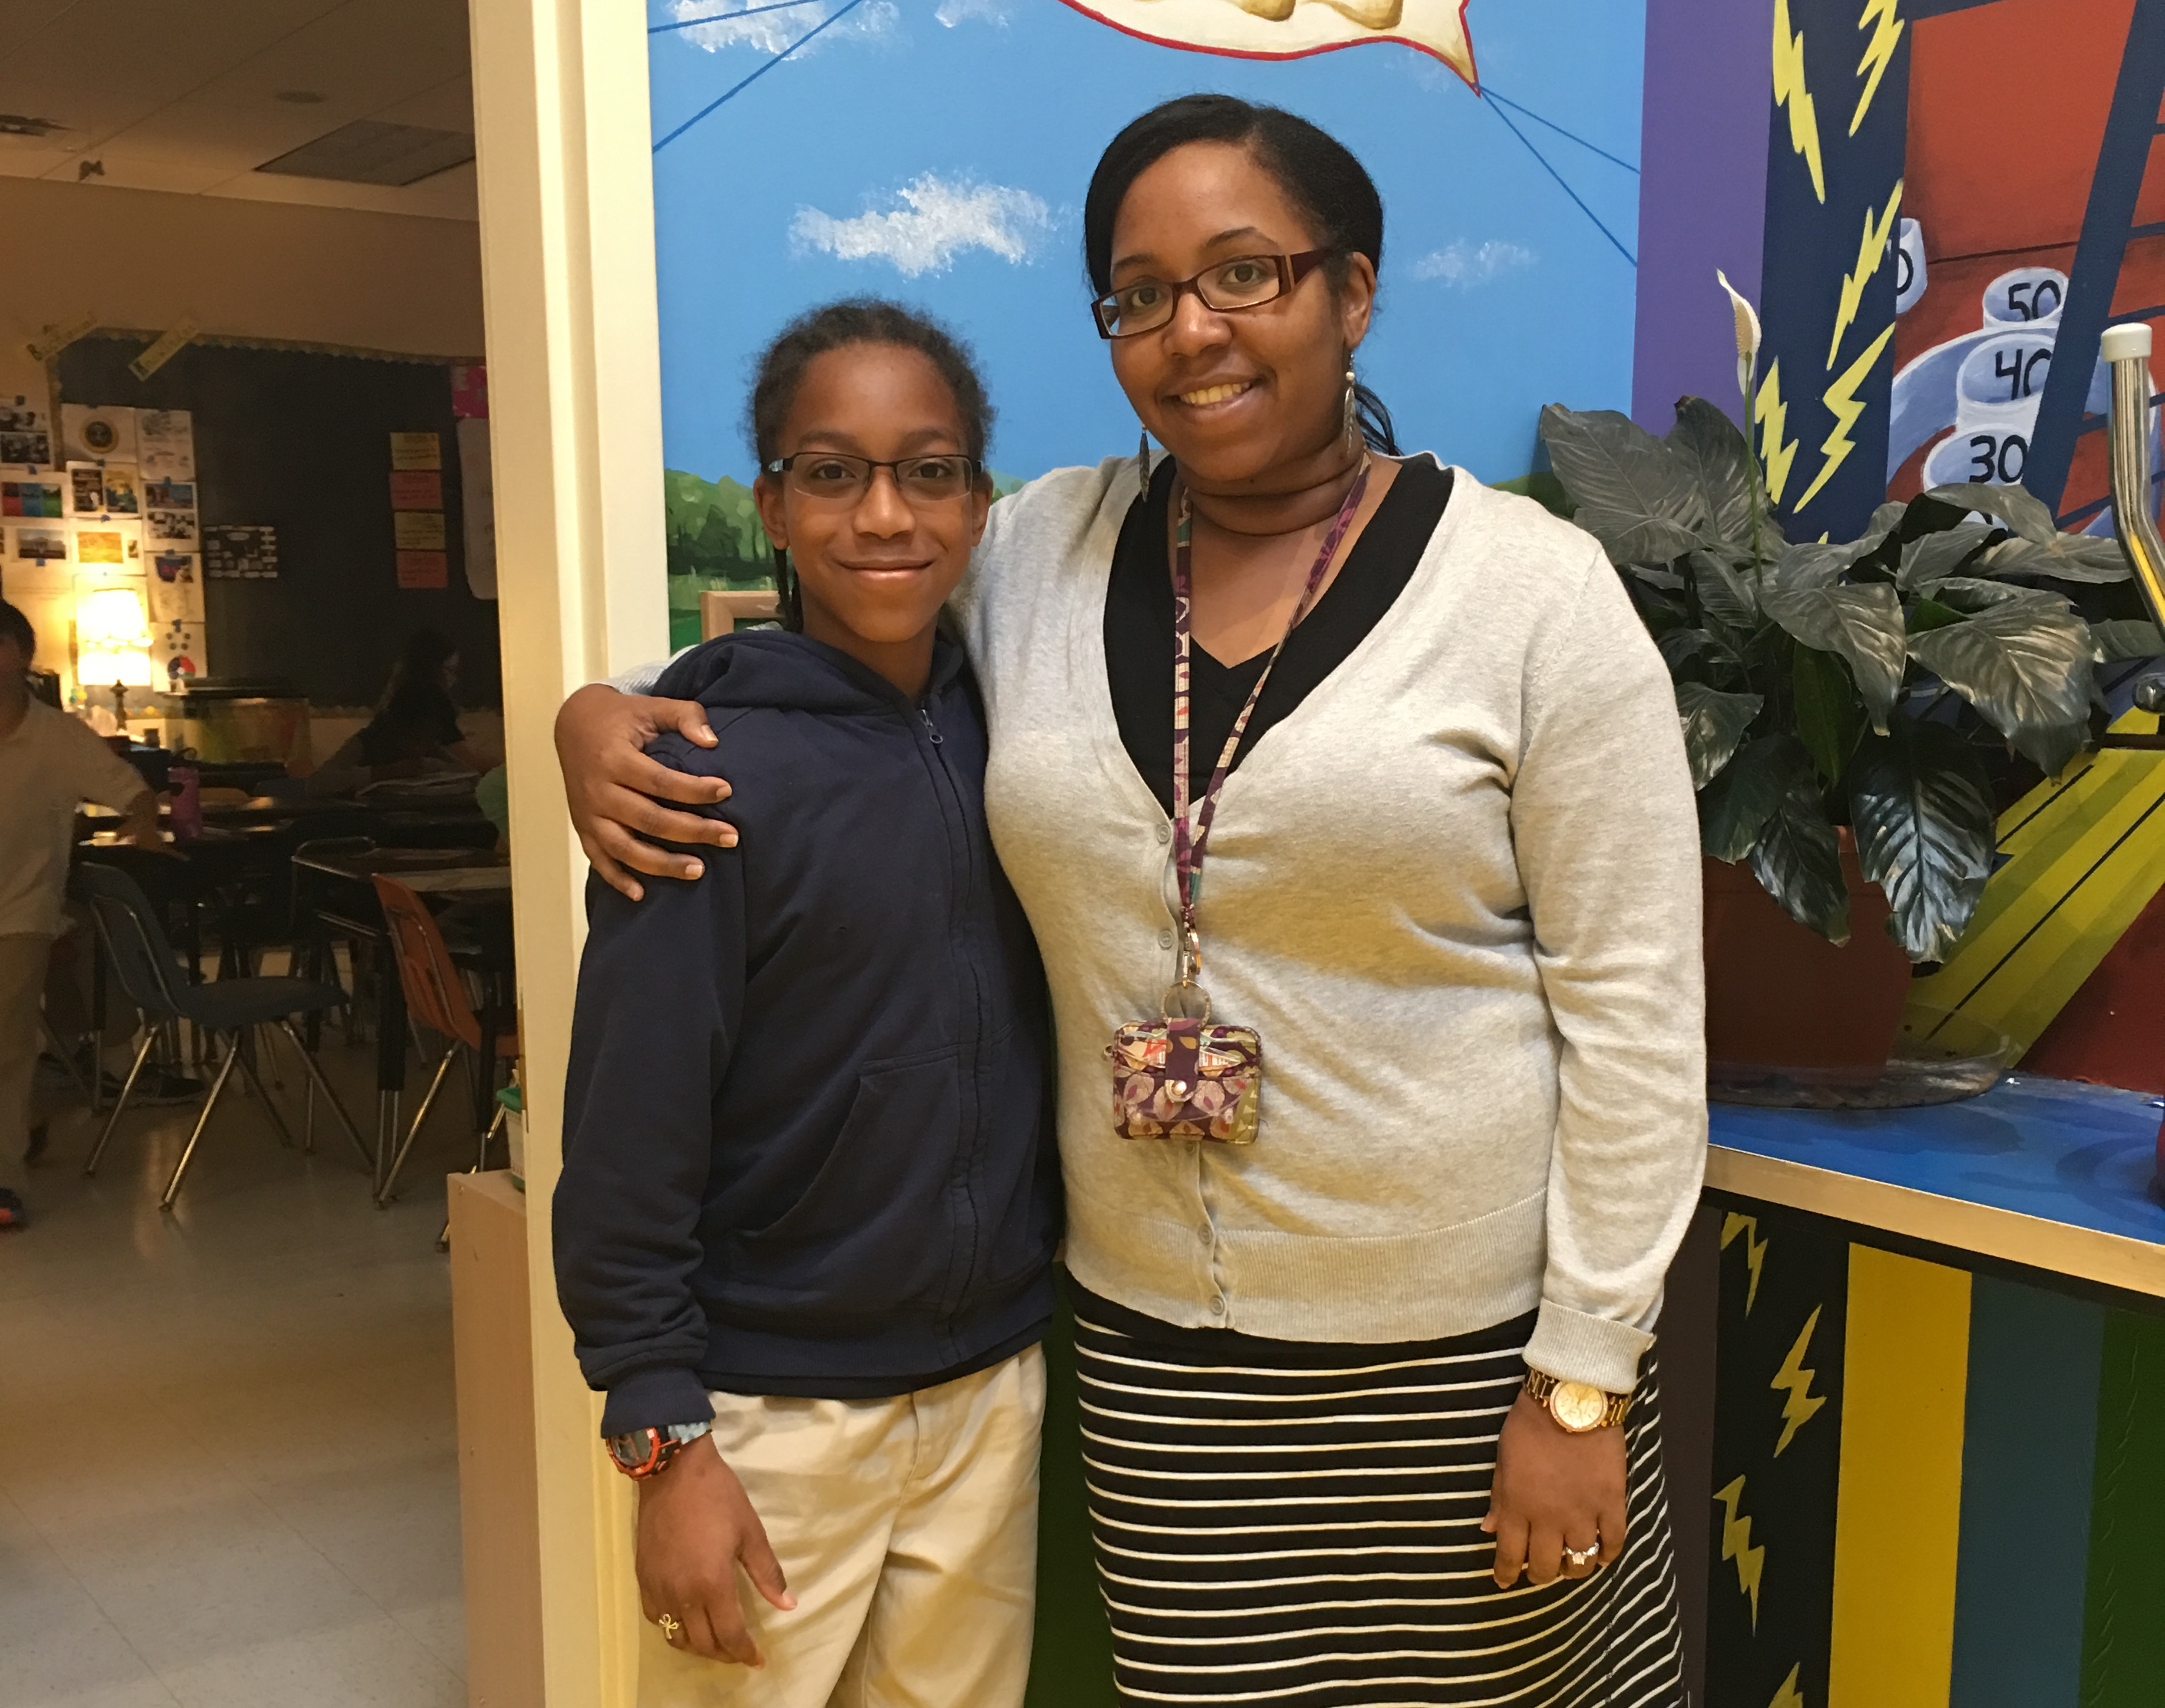 Maxwell standing next to his fifth grade teacher Ms. Tanya